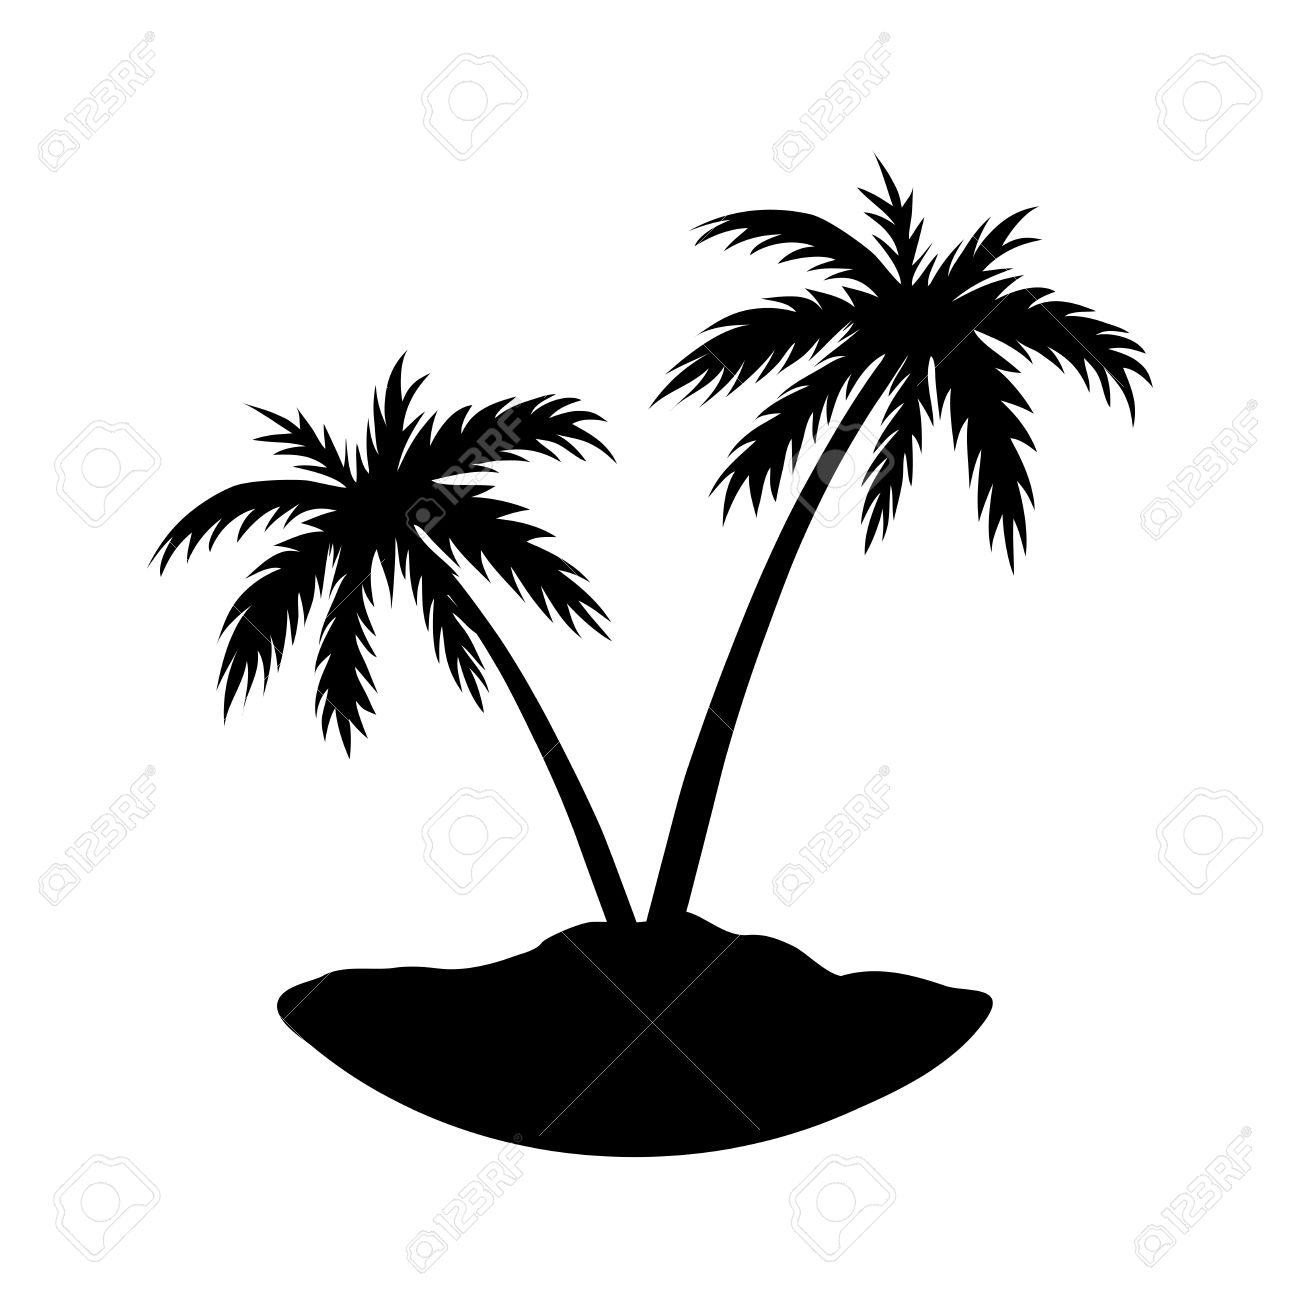 Palm Tree Silhouette | Free download on ClipArtMag